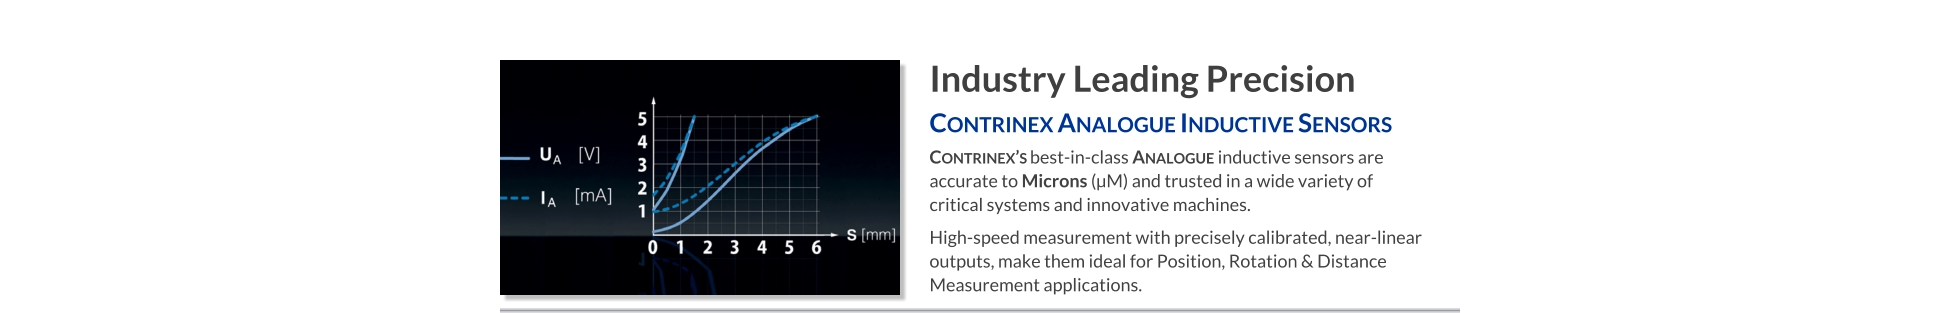 Industry Leading Precision Contrinex Analogue Inductive Sensors   Contrinex’s best-in-class Analogue inductive sensors are accurate to Microns (µM) and trusted in a wide variety of critical systems and innovative machines. High-speed measurement with precisely calibrated, near-linear outputs, make them ideal for Position, Rotation & Distance Measurement applications.